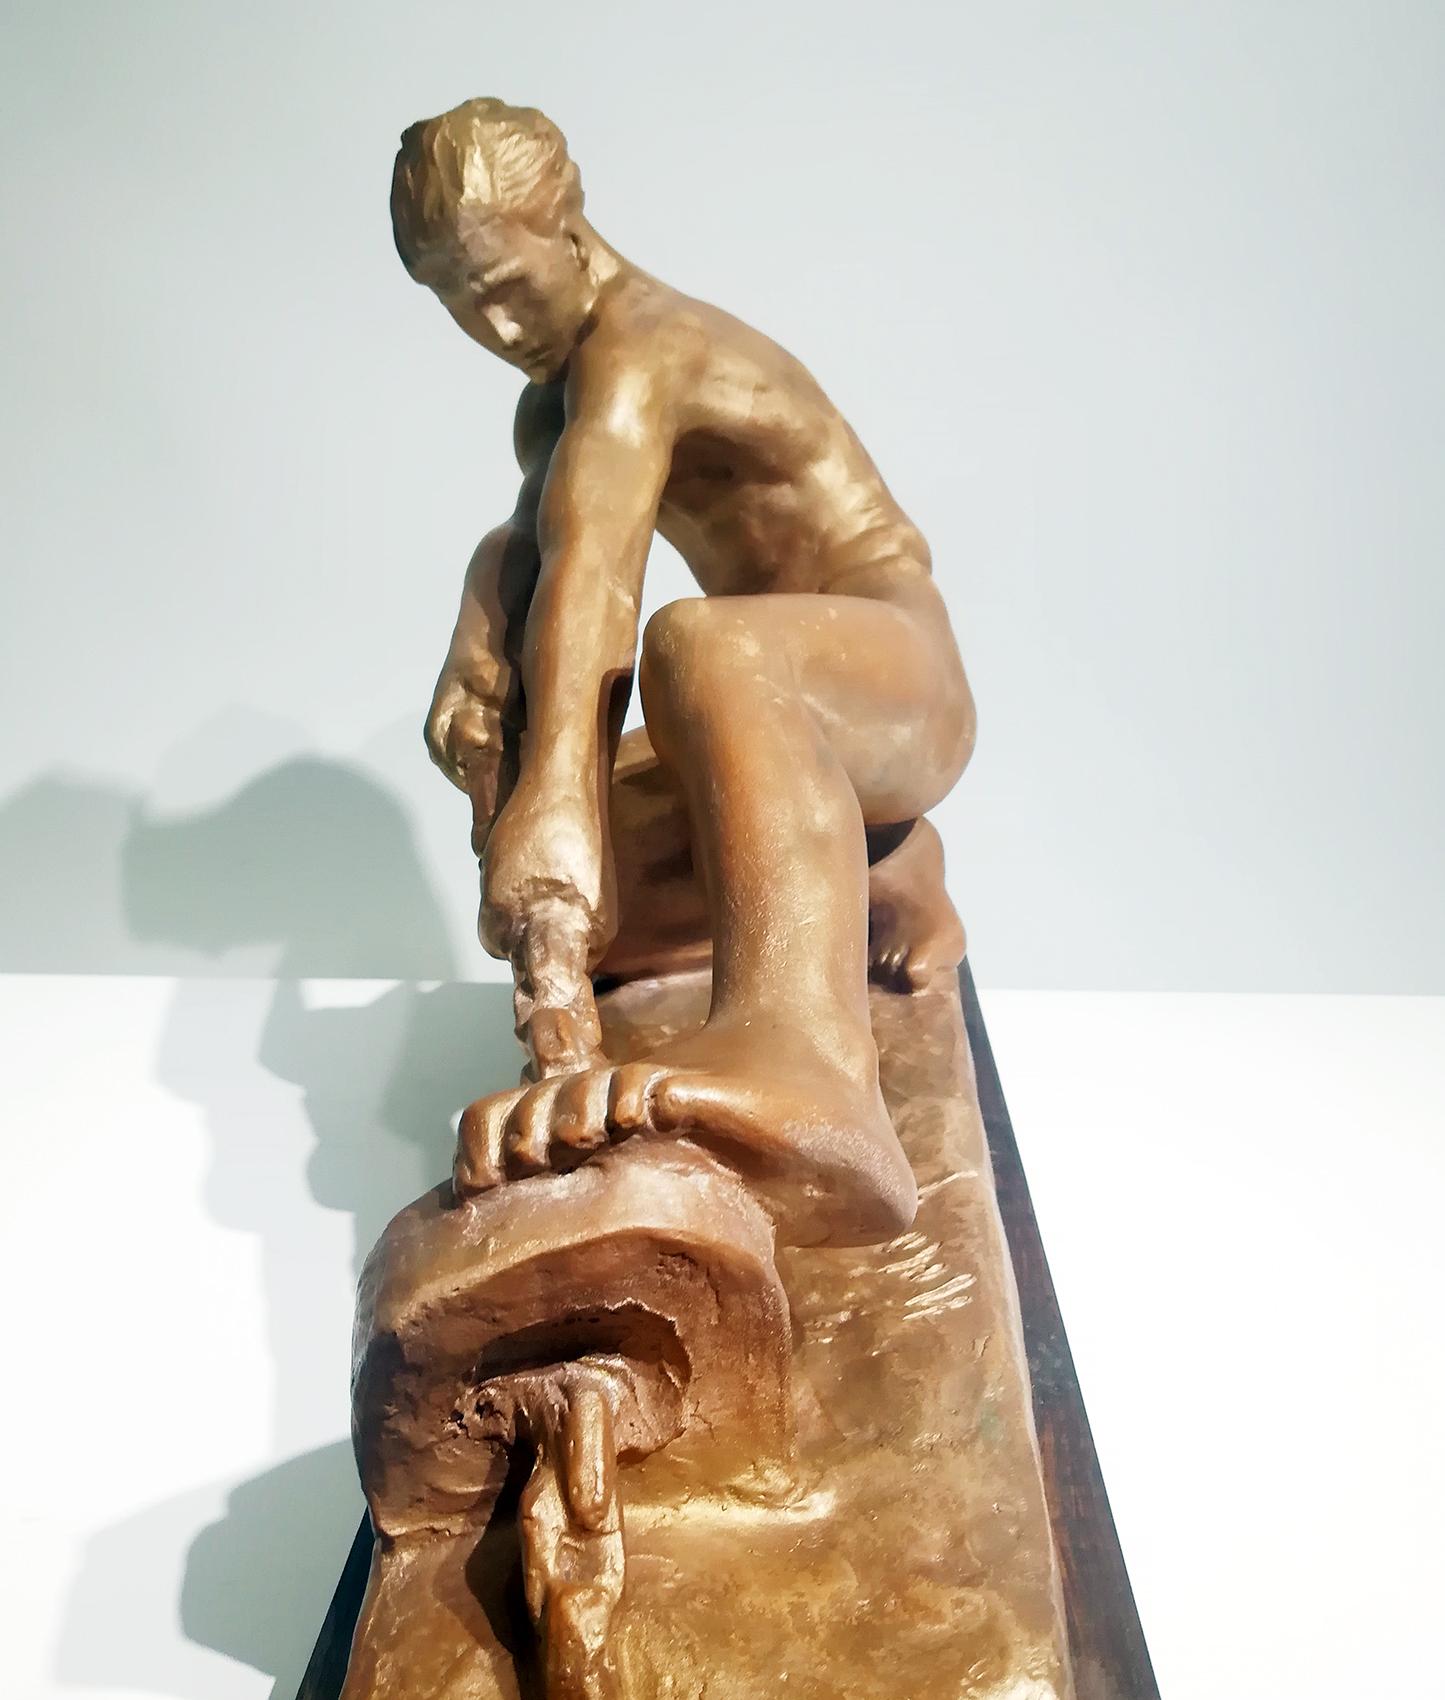 Art Deco terracotta sculpture of an athletic young man pulling a rope signed by the French artist Alexandre Kelety.
Mounted on a wooden base.
Dimensions of the wooden base: H 3 cm x W 46 cm x D 14.5 cm.
Dimensions of the whole sculpture: H 32 cm